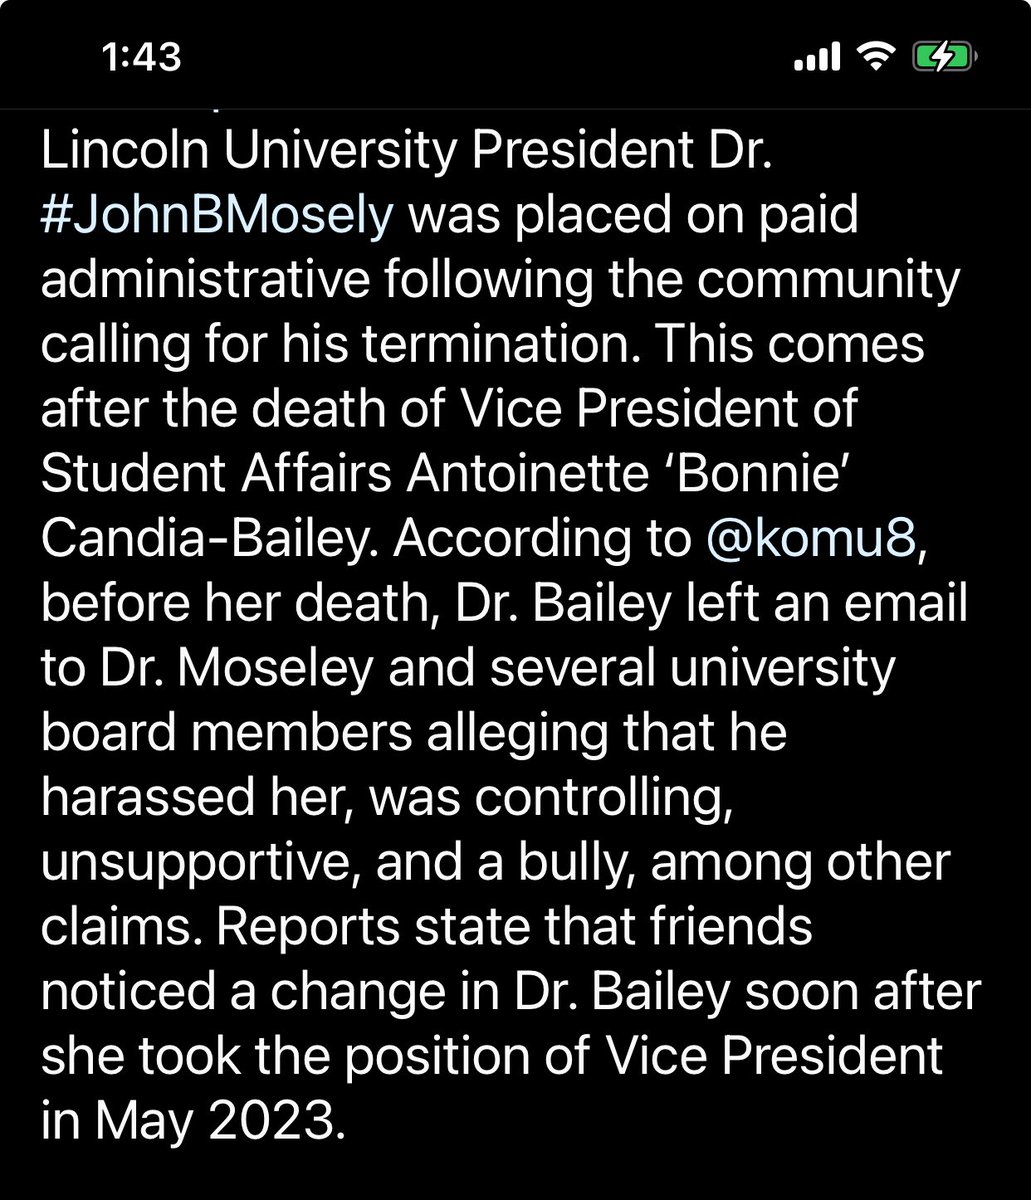 THIS BASTID GOT PAID LEAVE FOR CAUSING THE DEATH OF A FINE EDUCATOR ITS NOT OVER!!  Call 573-681-5000 / email pasleyv@gmail.com curators@lincolnu.edu #hbcu #FireMoseley